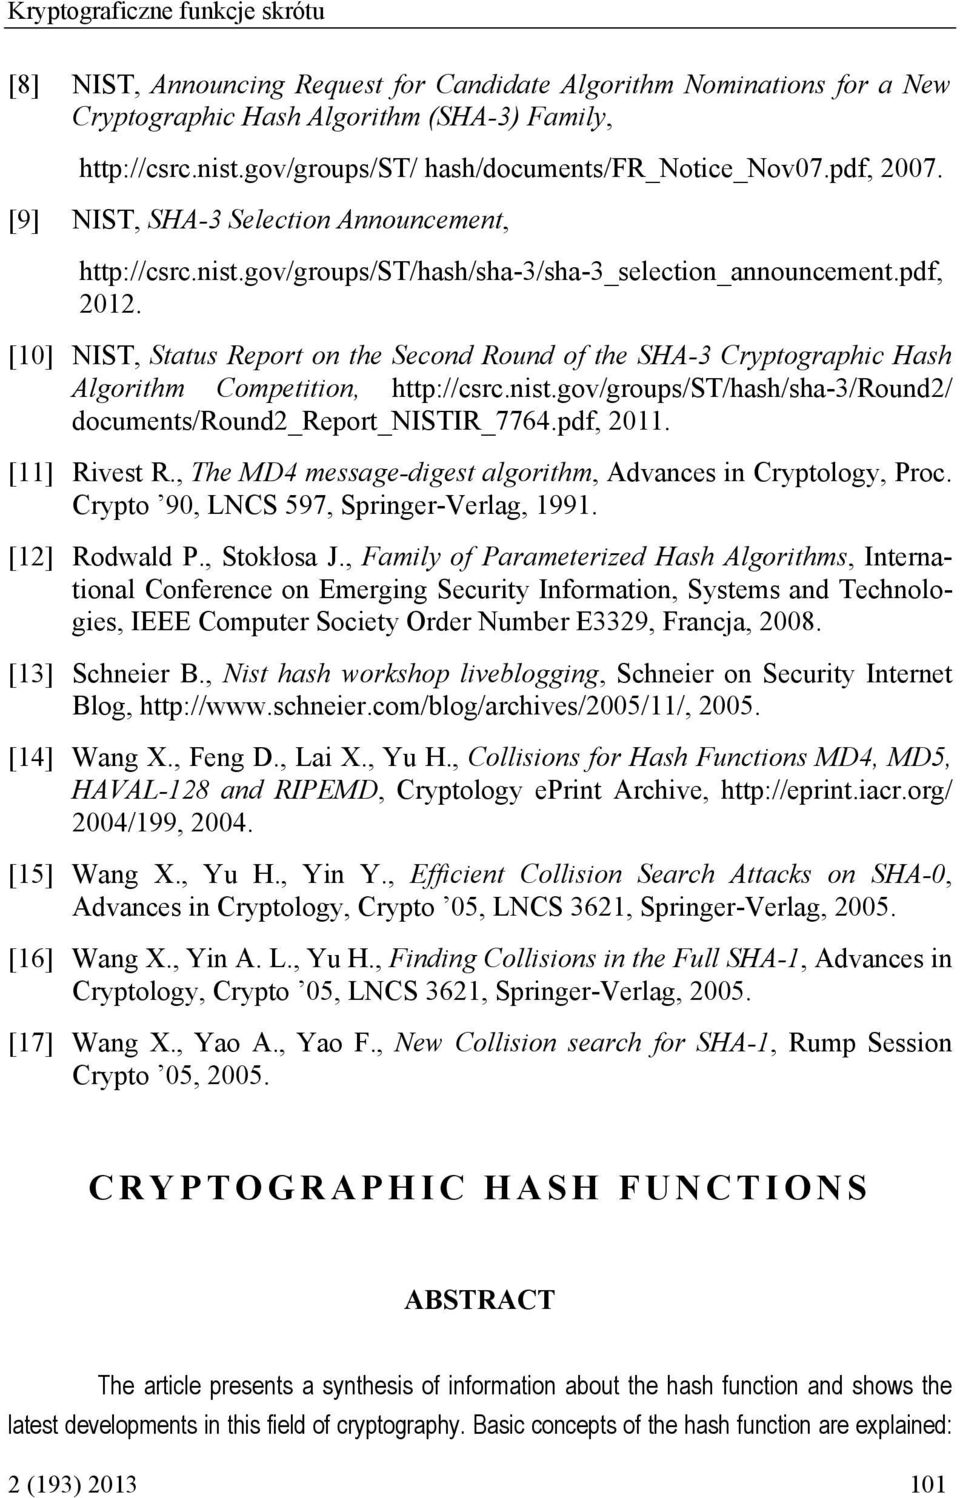 [10] NIST, Status Report on the Second Round of the SHA-3 Cryptographic Hash Algorithm Competition, http://csrc.nist.gov/groups/st/hash/sha-3/round2/ documents/round2_report_nistir_7764.pdf, 2011.